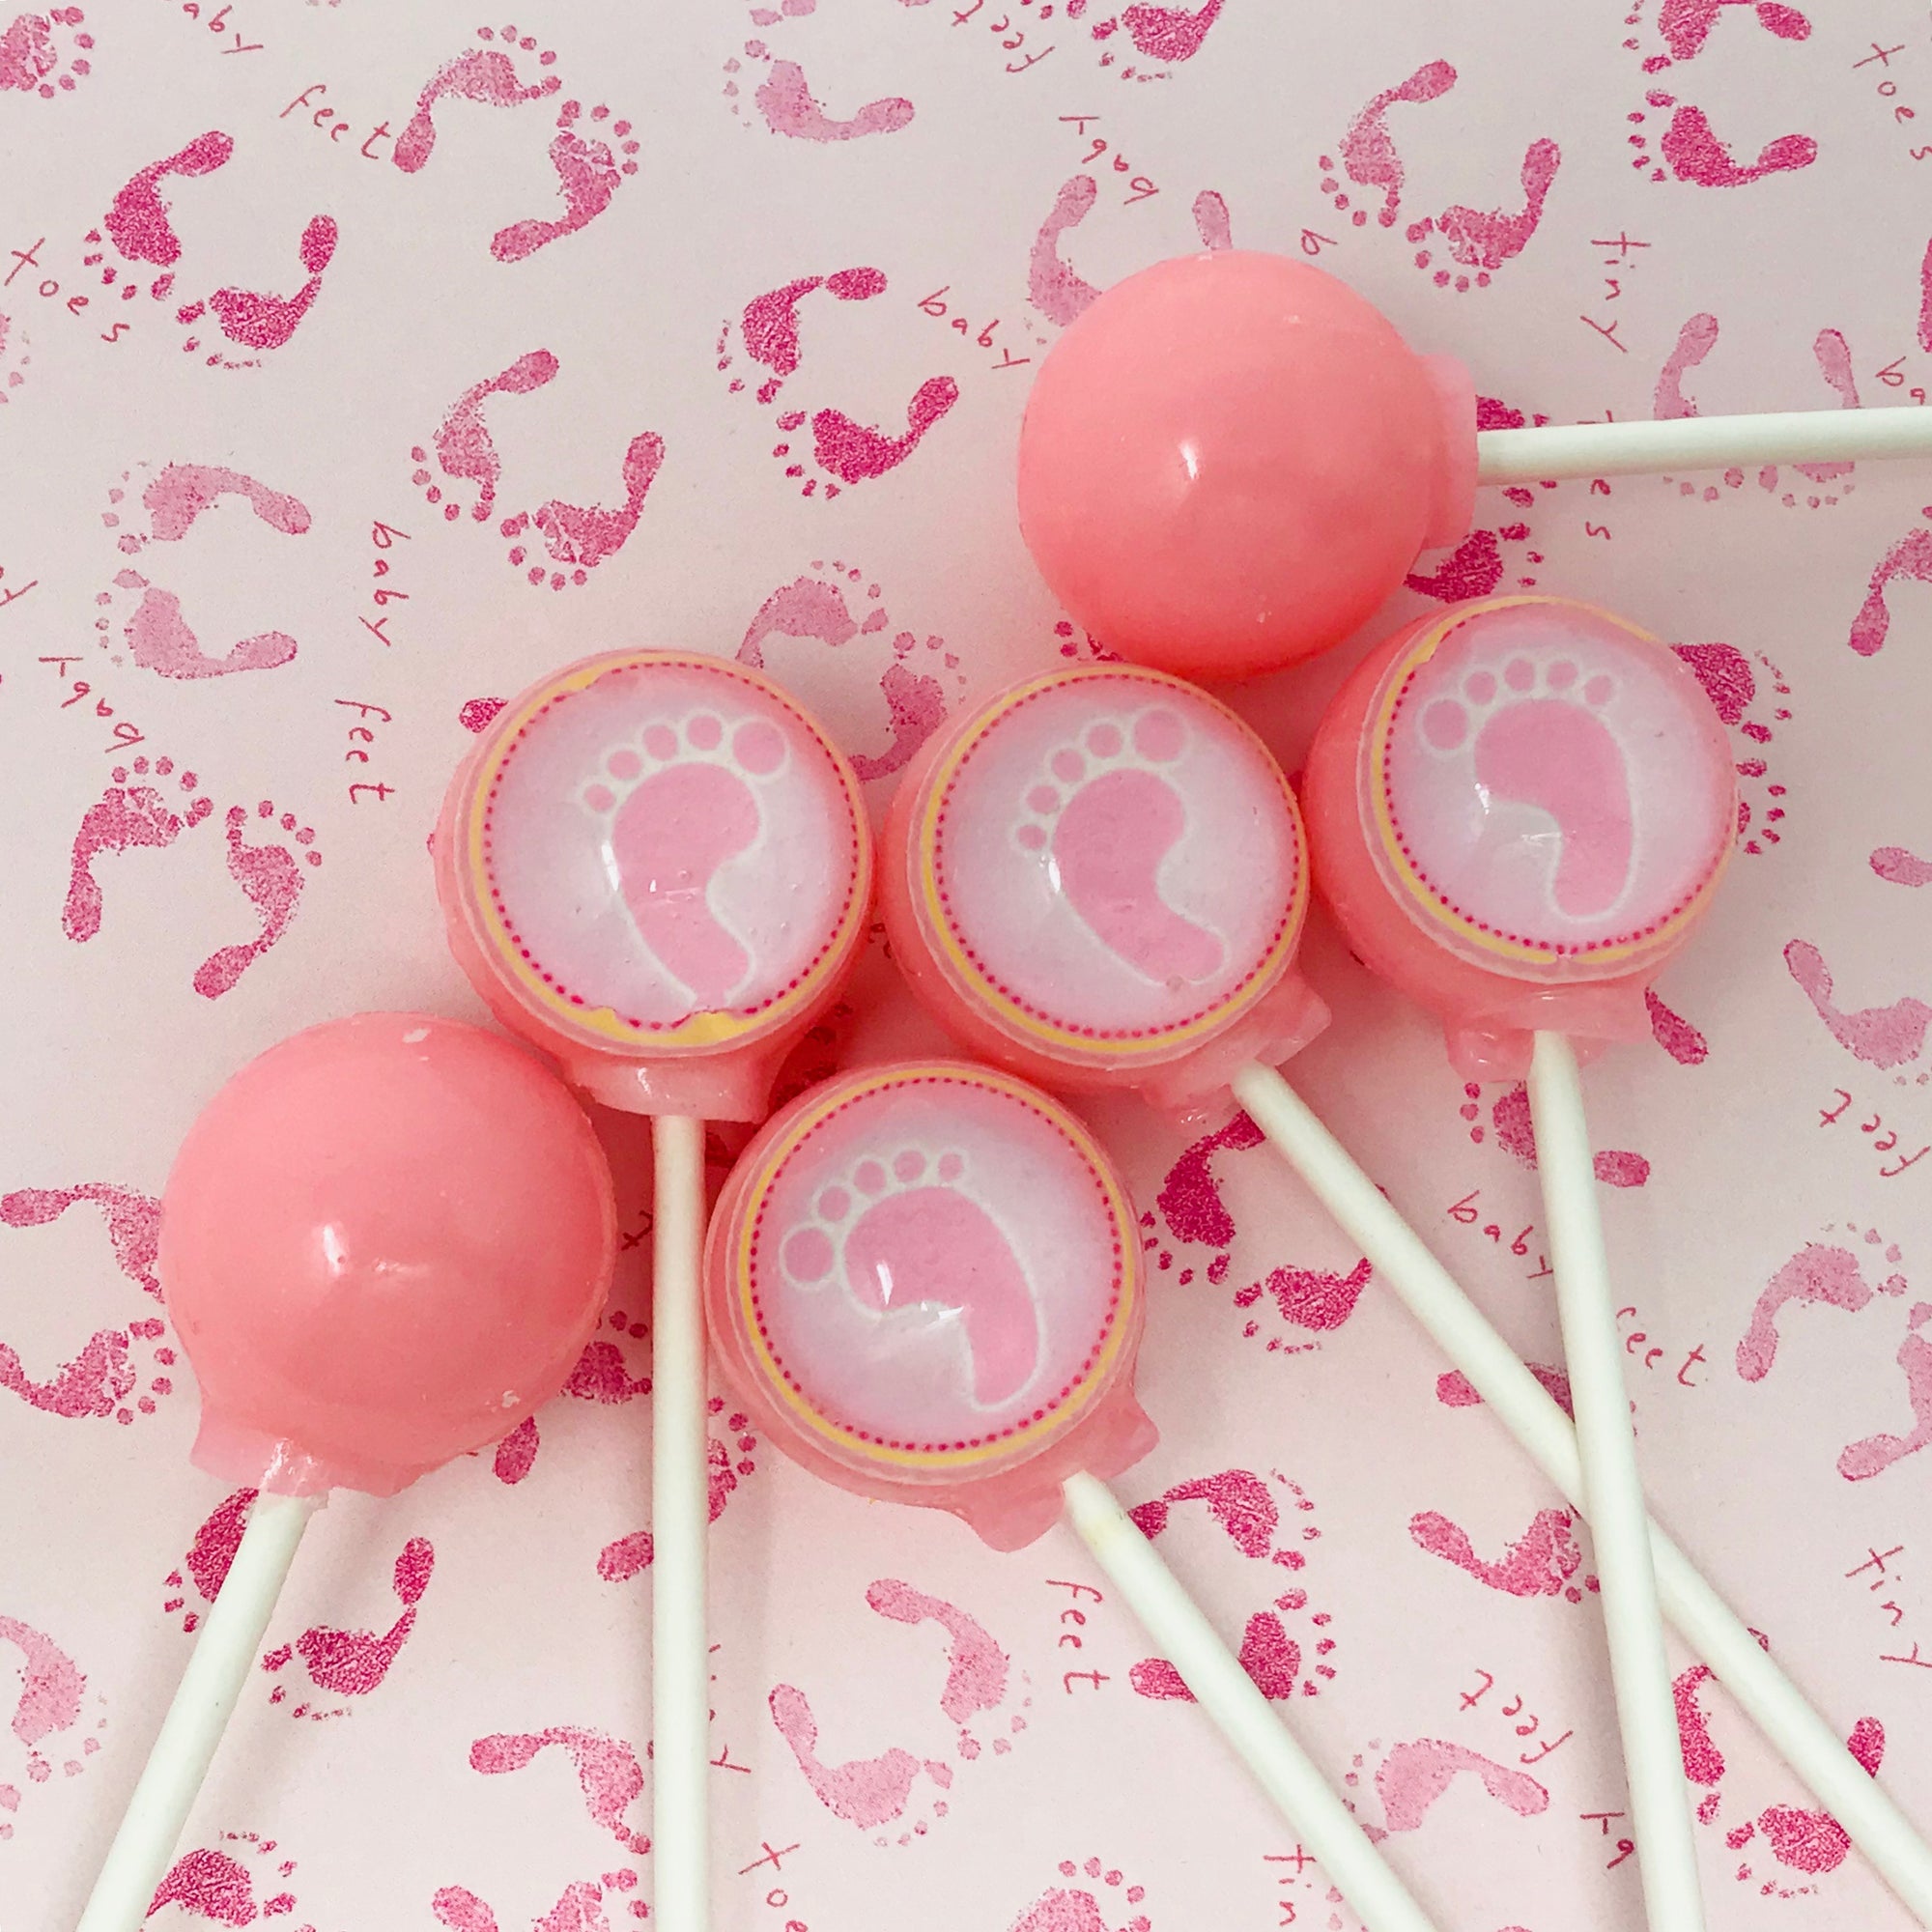 Baby Footprint Lollipop 6-piece set by I Want Candy!